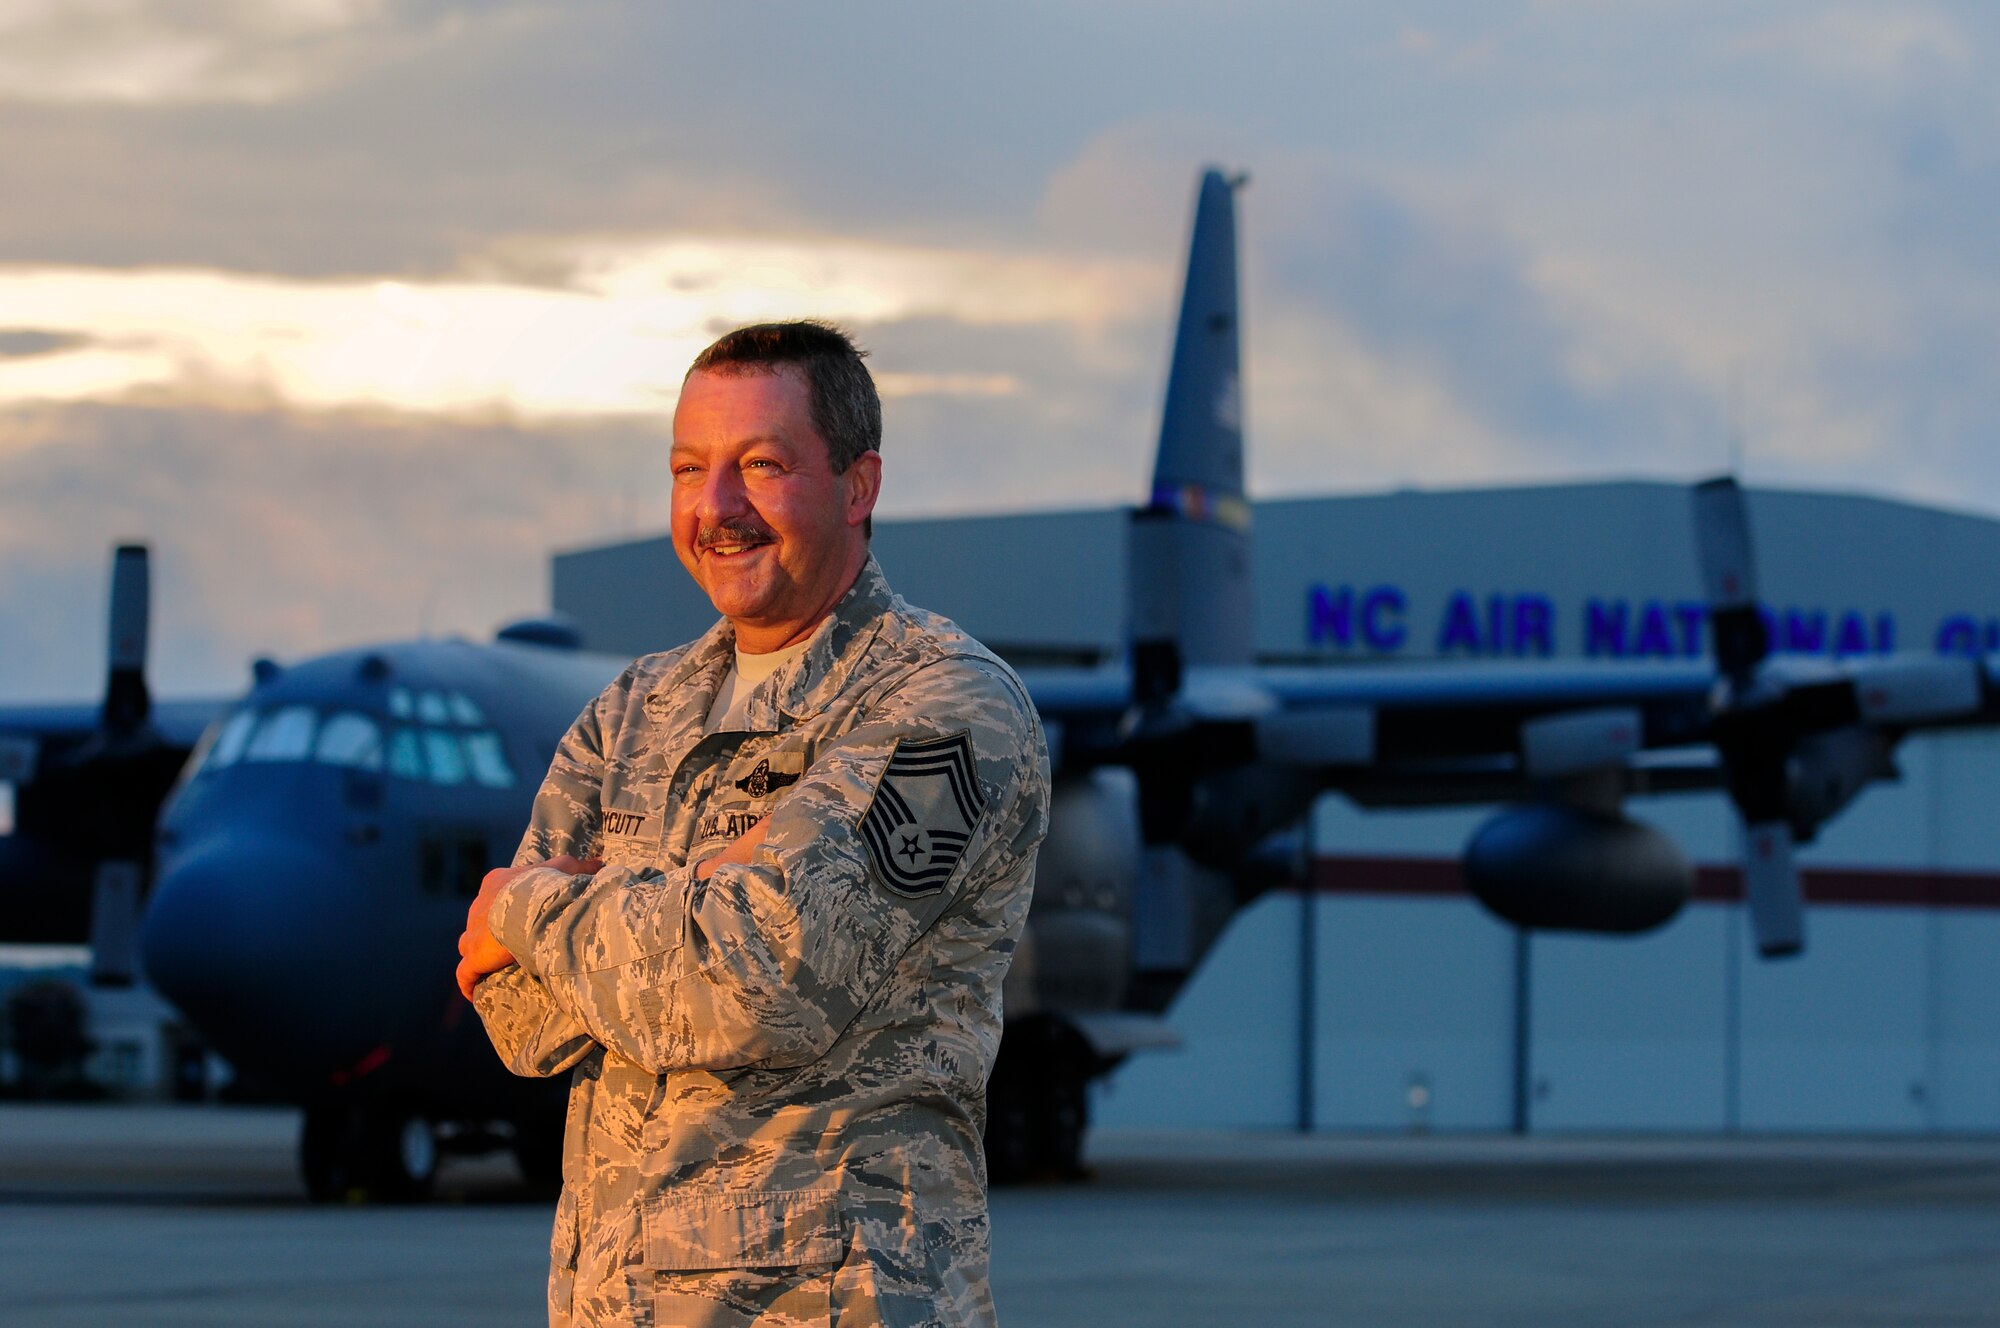 Chief Master Sgt. Andrew Huneycutt, 145th Operations Support Squadron (OSS) chief loadmaster, earned the 12,500 Mishap-Free Flying Hour Milestone Award which culminates his 36 year career and dedication to standards at the North Carolina Air National Guard Base, Charlotte Douglas International Airport, June 5, 2016. Huneycutt joined the North Carolina Air National Guard in January of 1980 and has spent his entire career as a loadmaster on the C-130 Hercules aircraft. He now provides leadership and management of the 156th Airlift Squadron and 145th OSS flying and ground training programs which ensures operational readiness of its members. (U.S. Air National Guard photo by Staff Sgt. Julianne M. Showalter/Released)